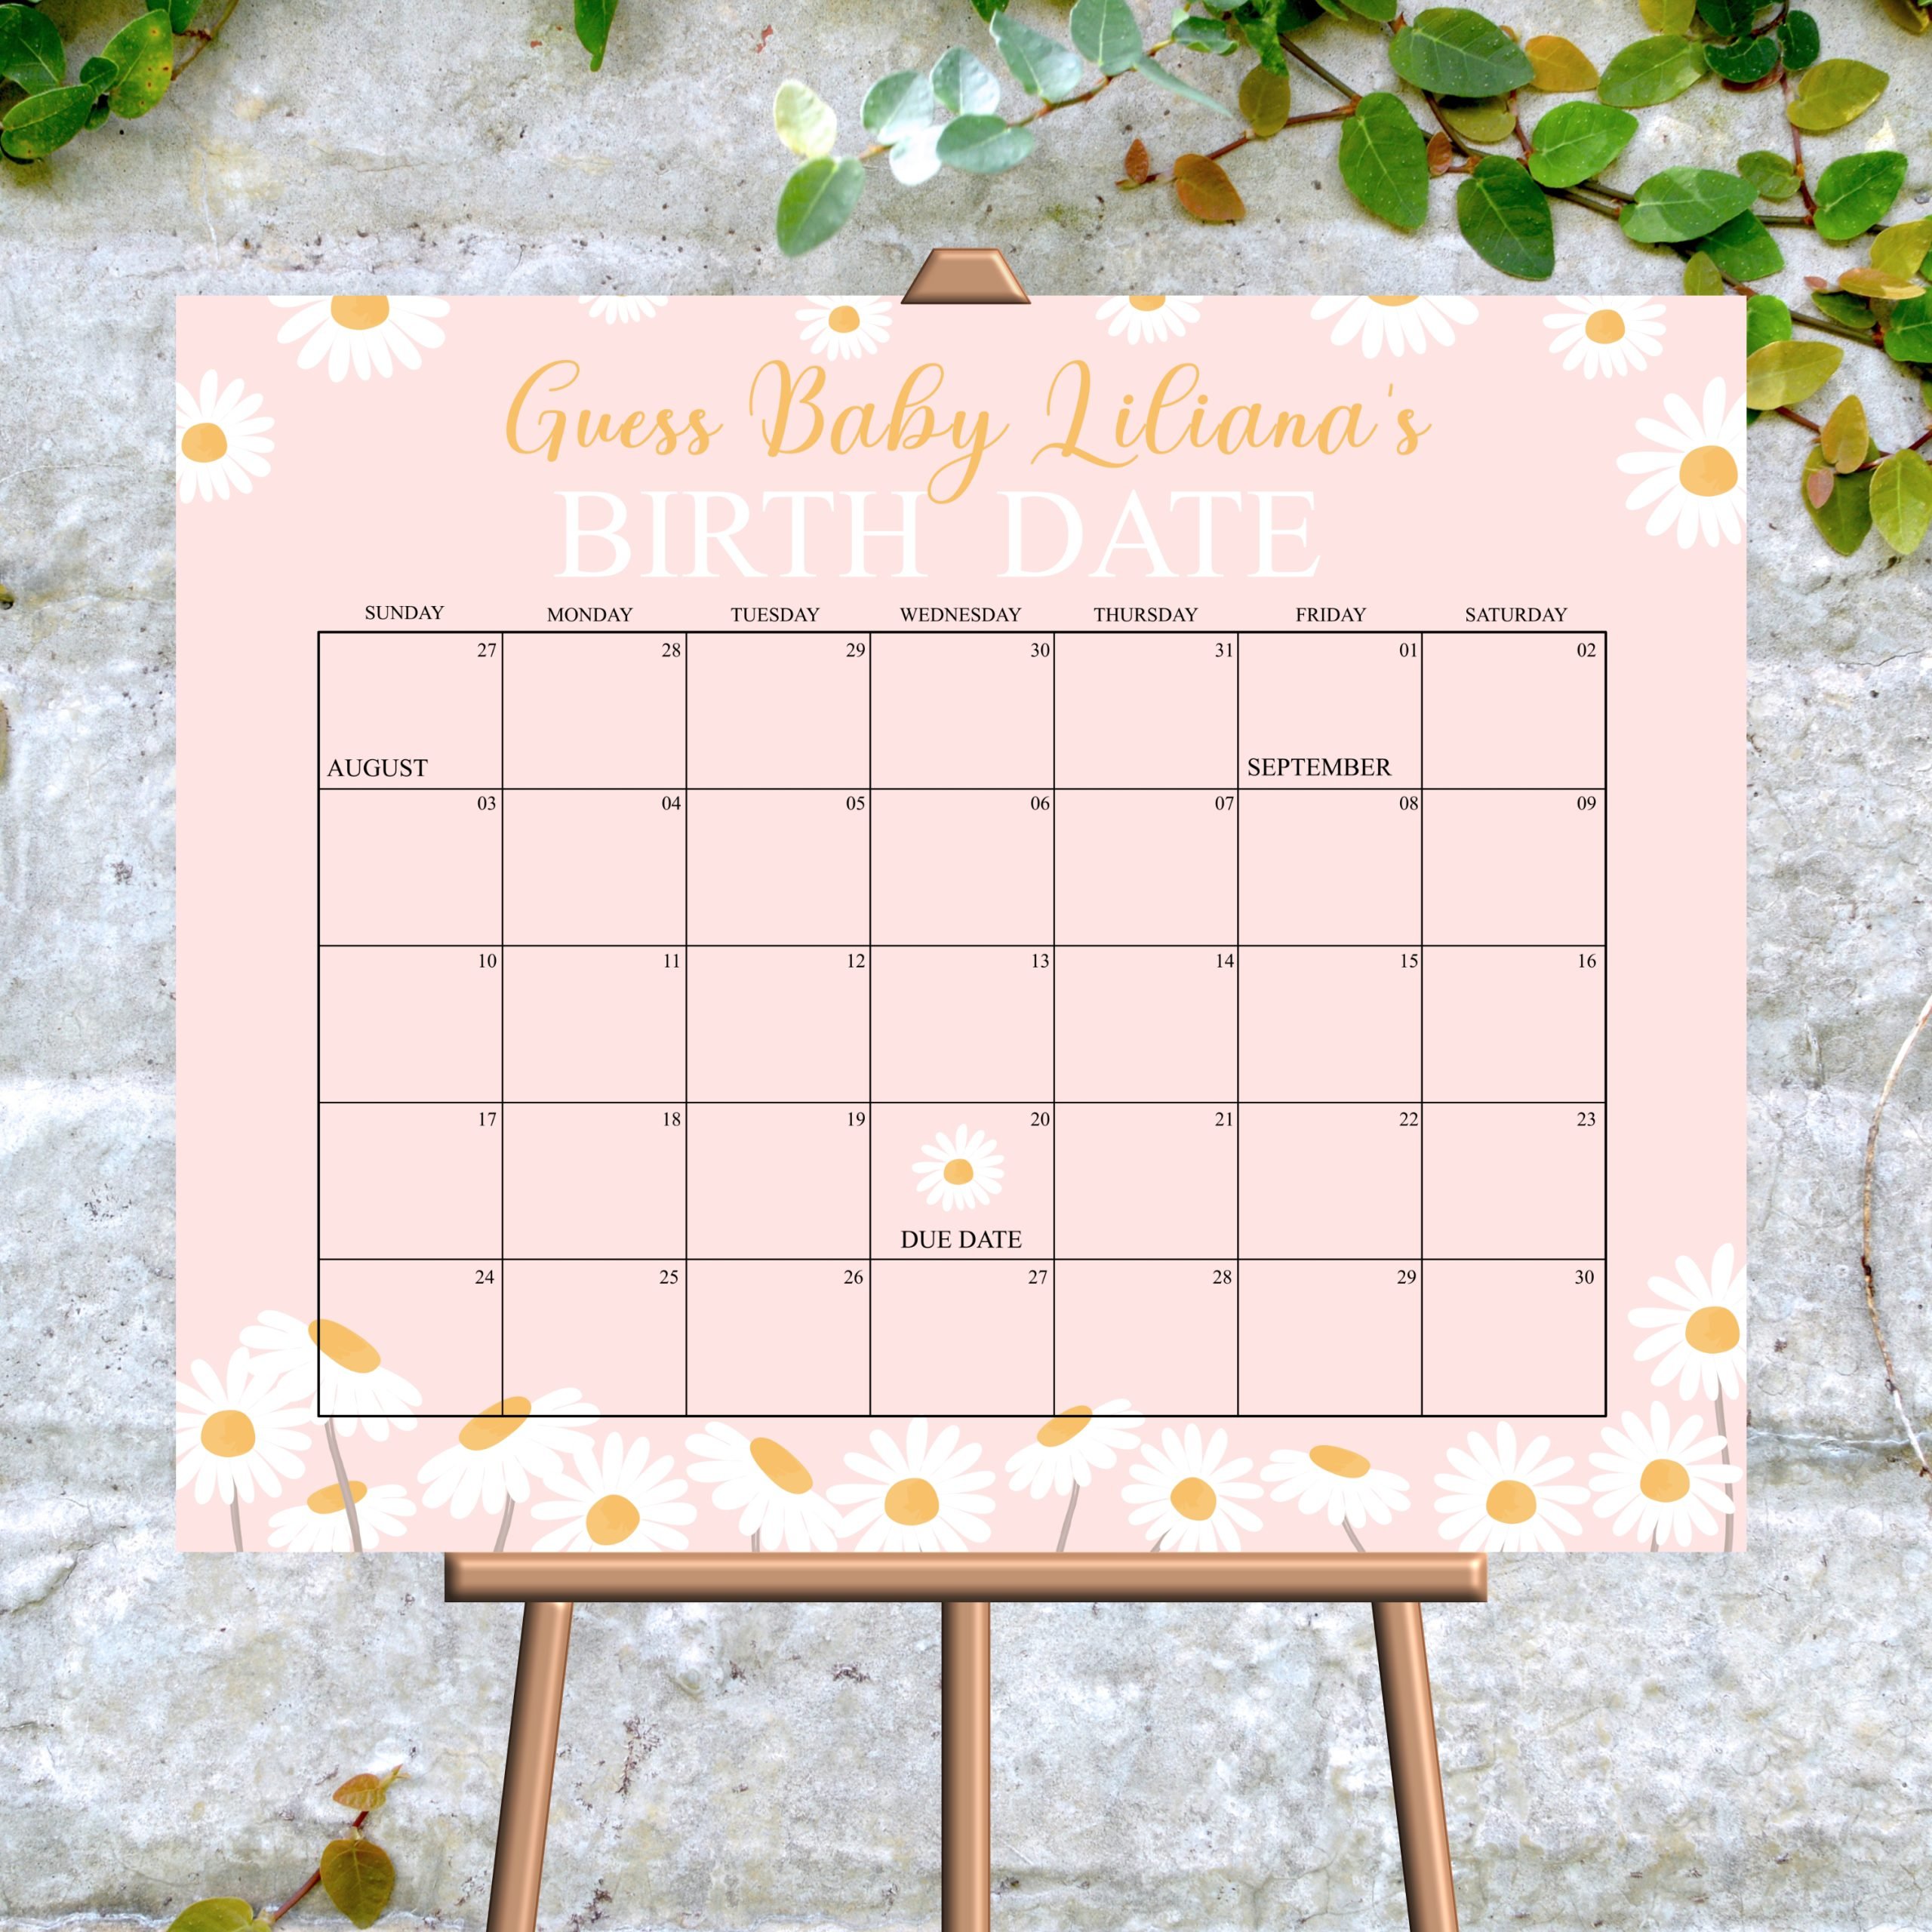 babies due date guess large print out 24